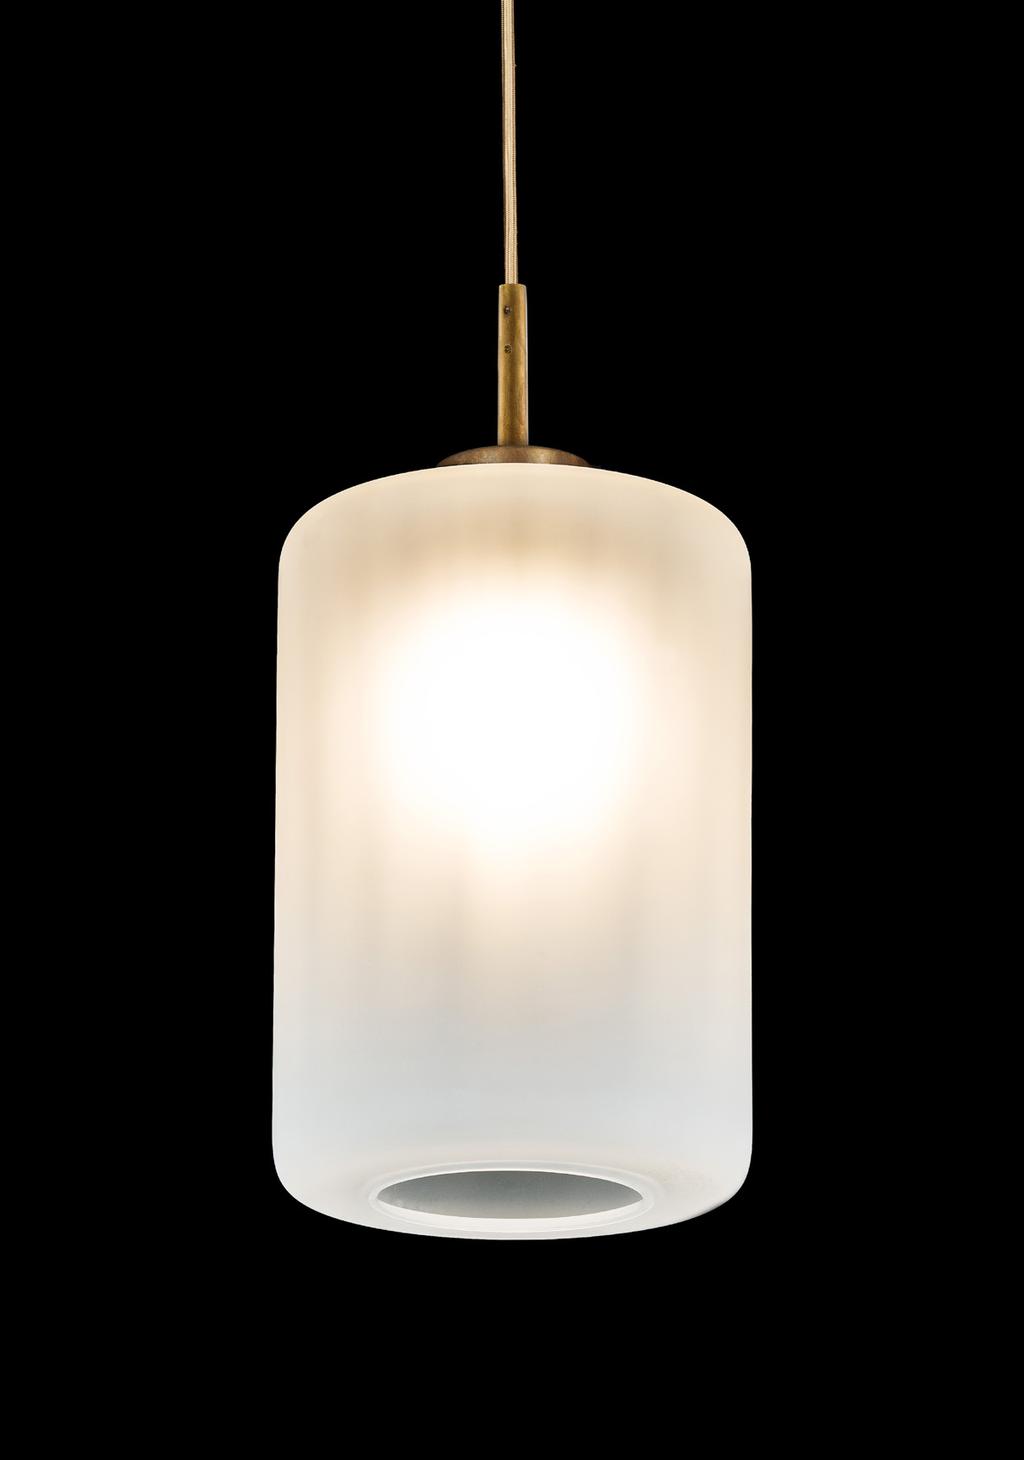 Louise Design by William Brand Standard the frame is available in burnished brass, and the lanterns in 4 different types of glass: bronze, clear satin, grey and iridescent.